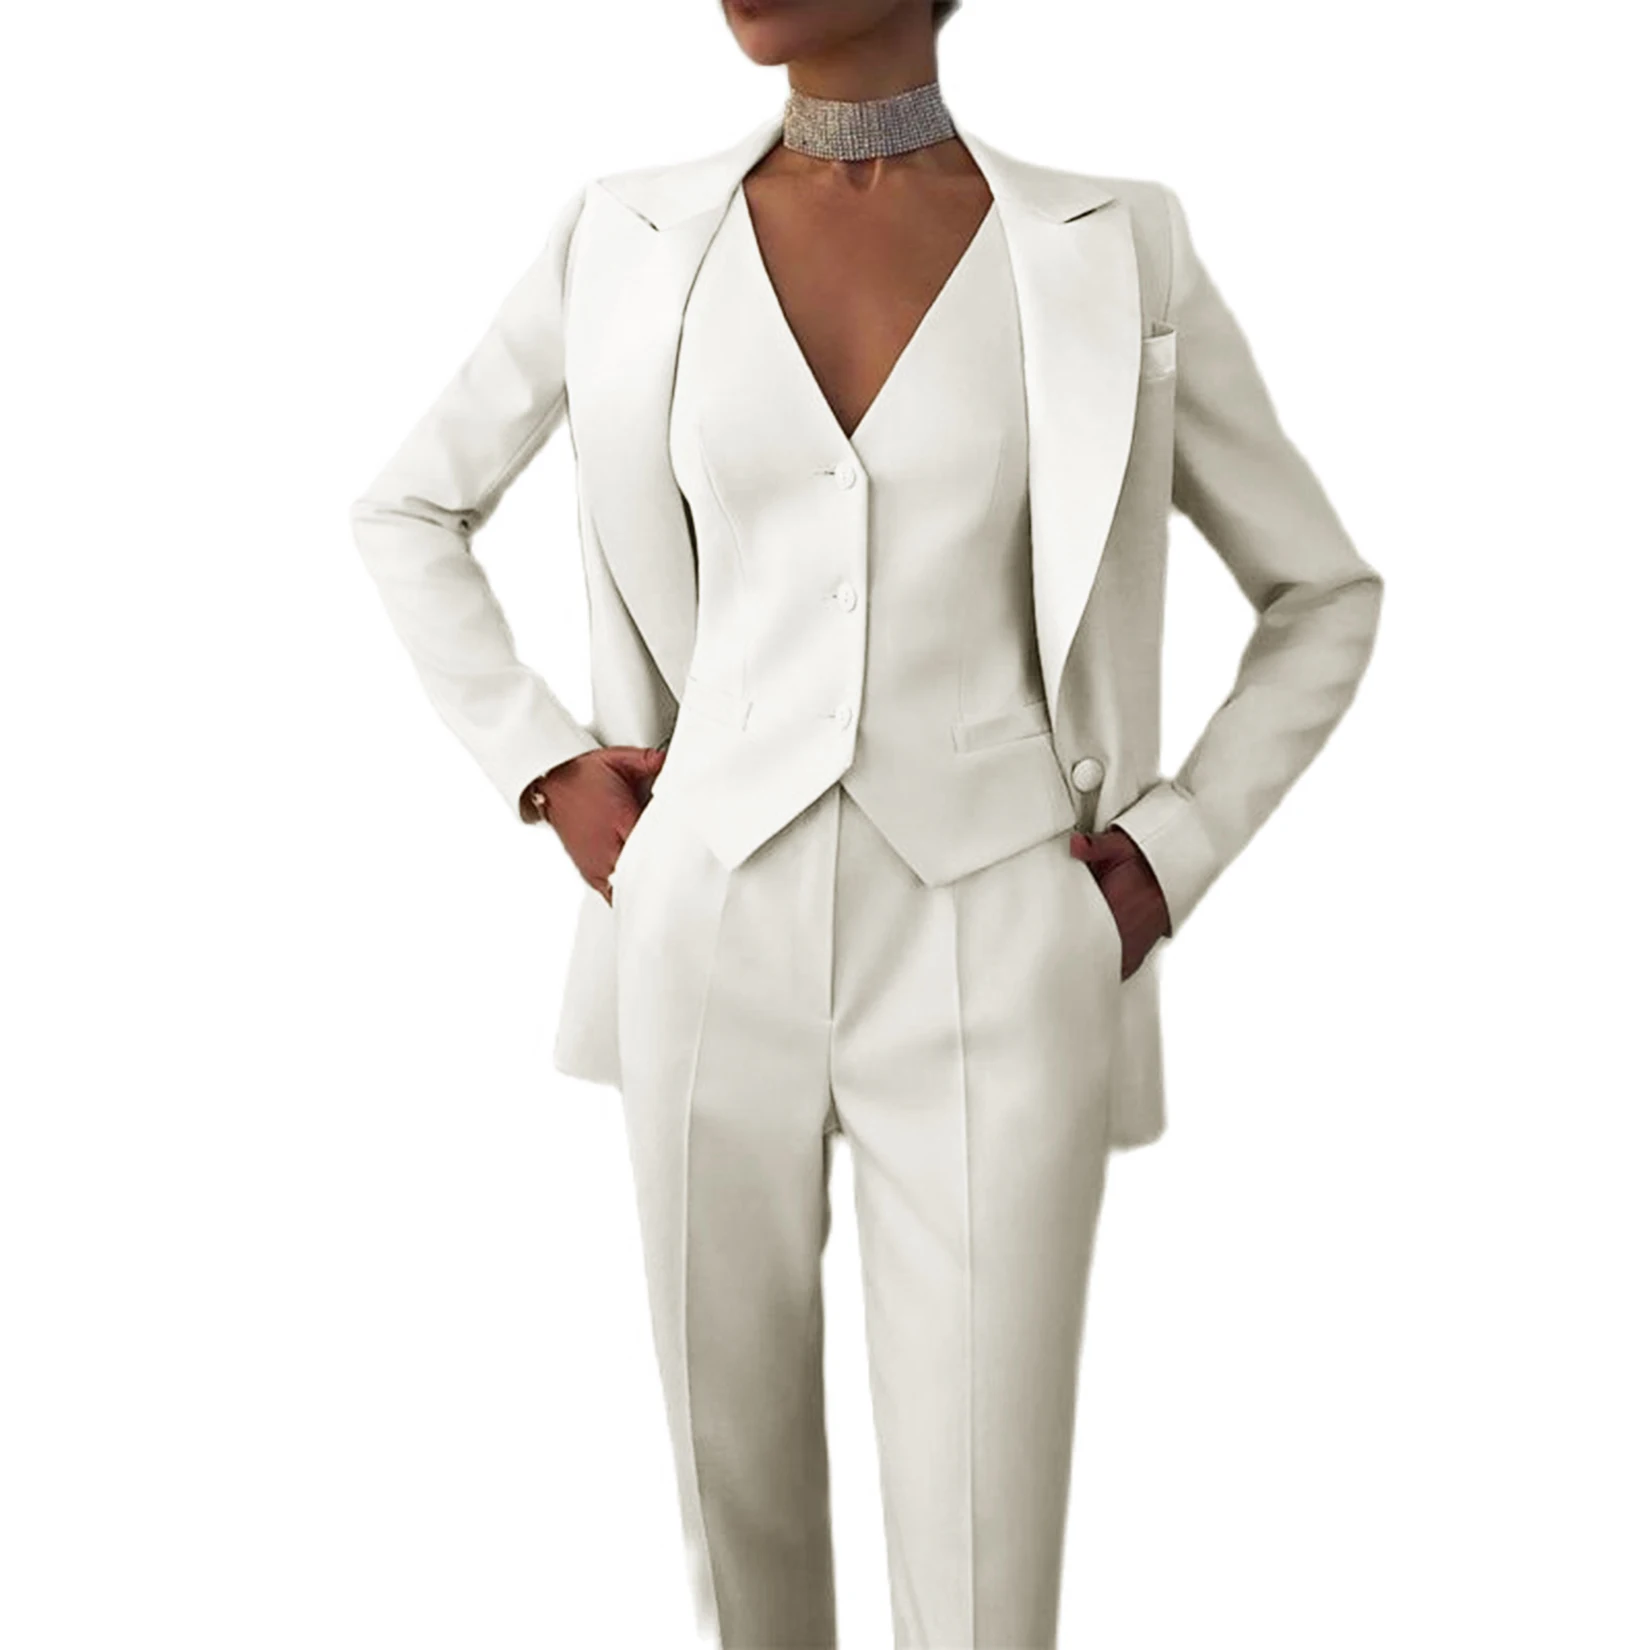 White Leisure Women Suits With White Collar Women Work Custom Ladies Suit  Business Suit Tuxedos Work WearJacket+Pants From Hongyeli, $147.74 |  DHgate.Com